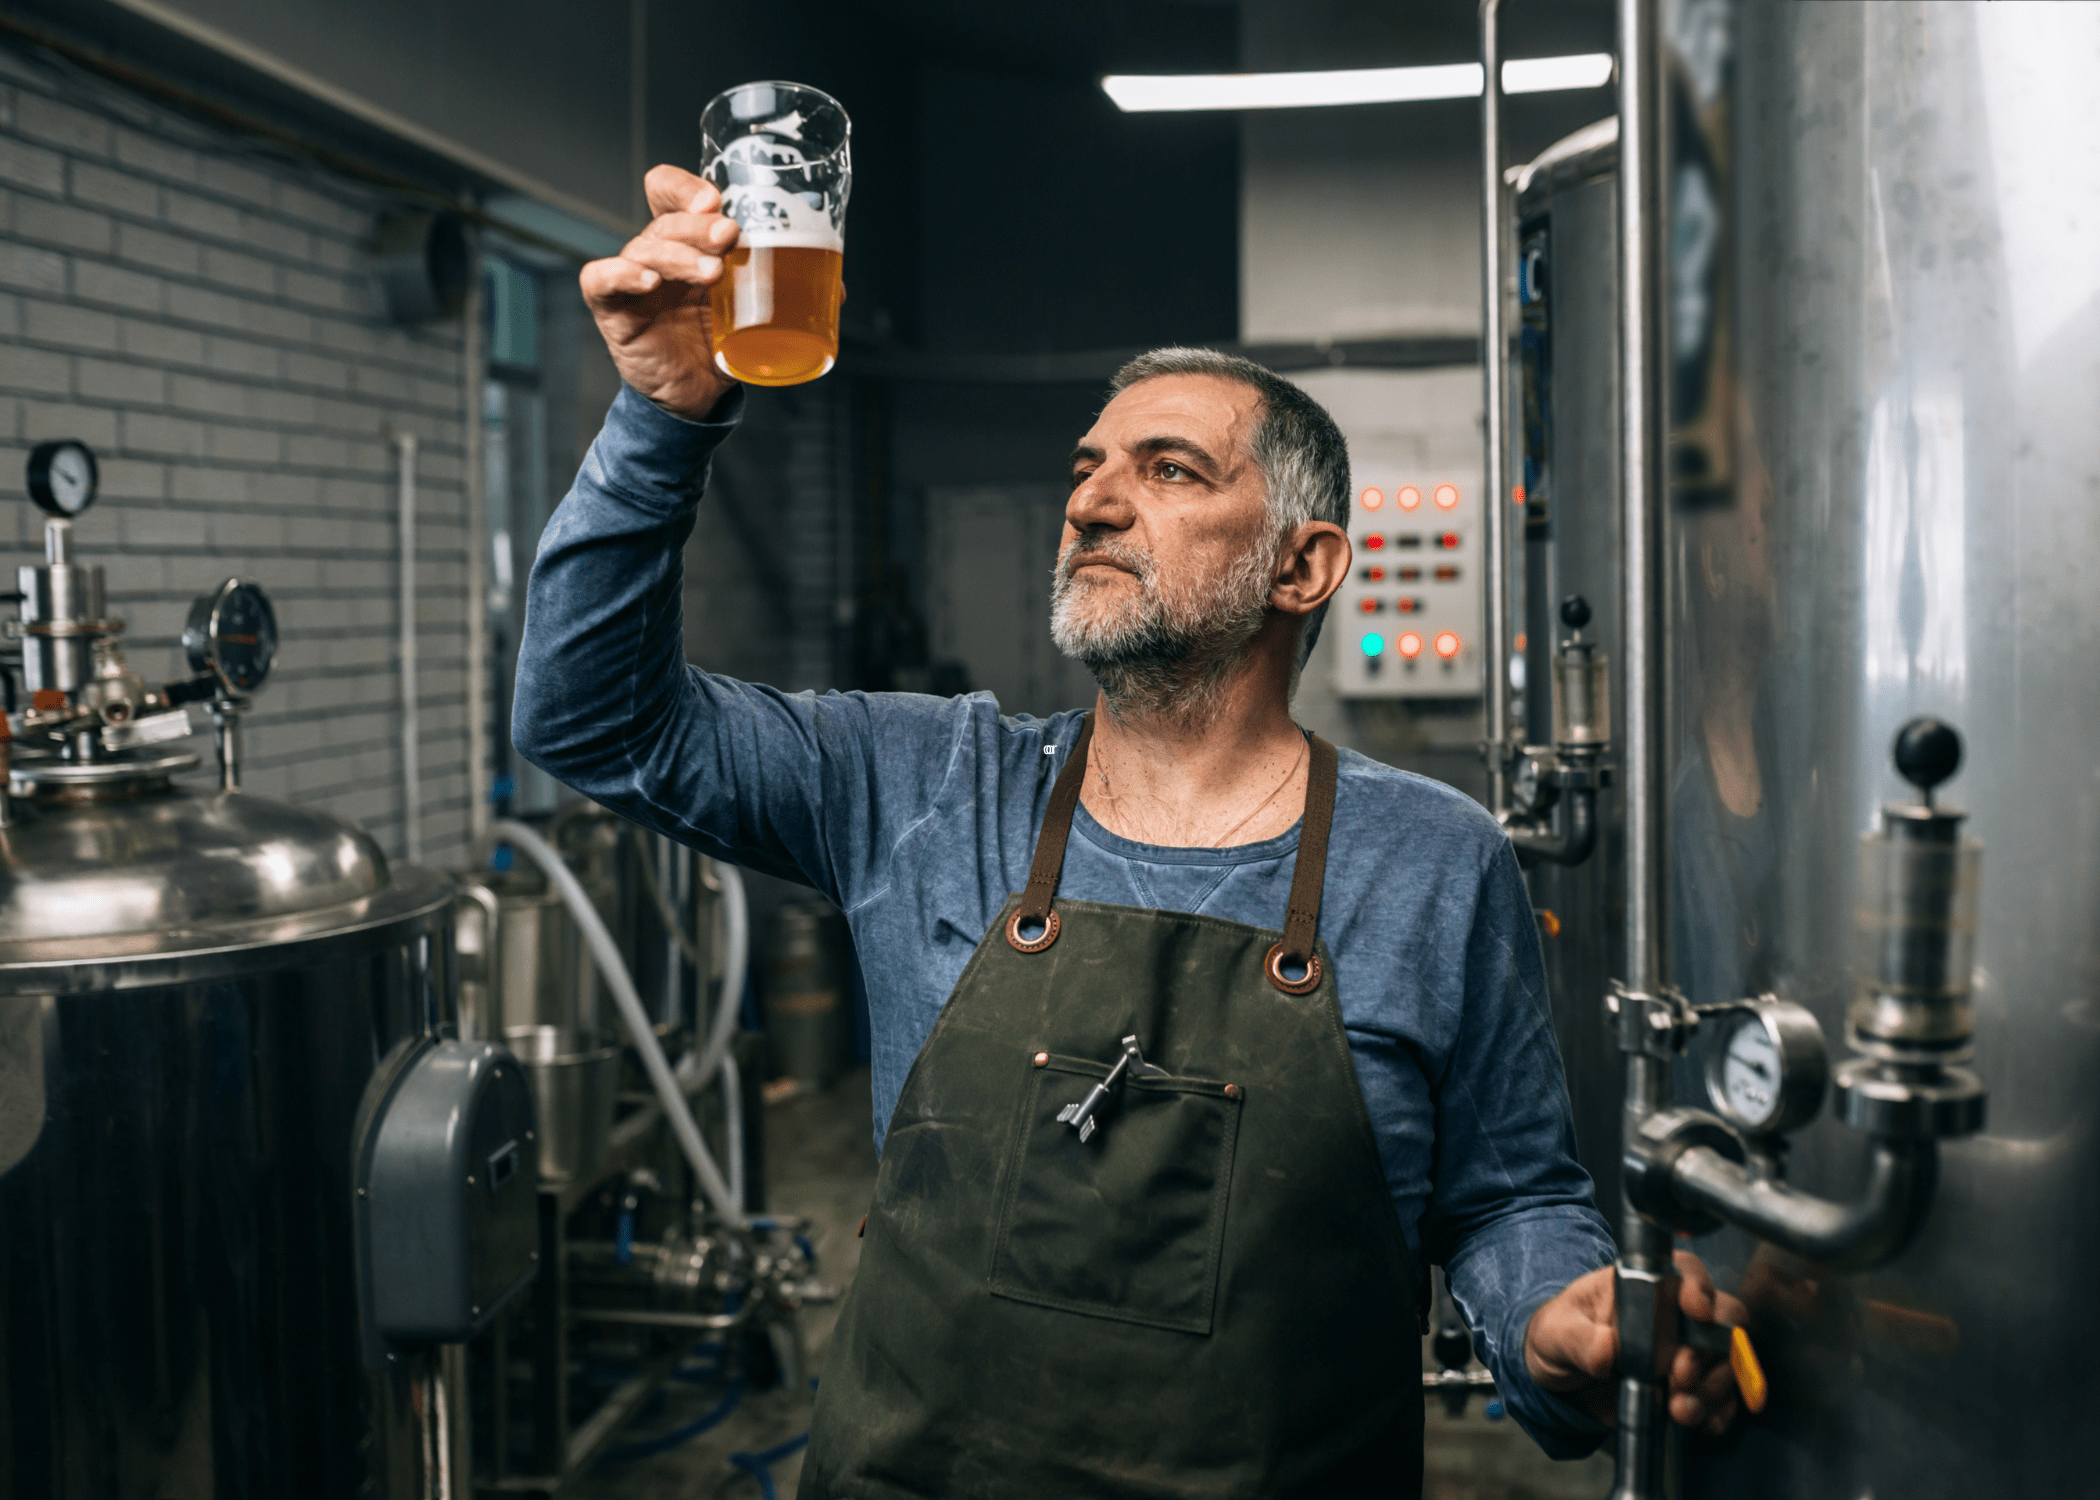 man making beer holding up glass of beer